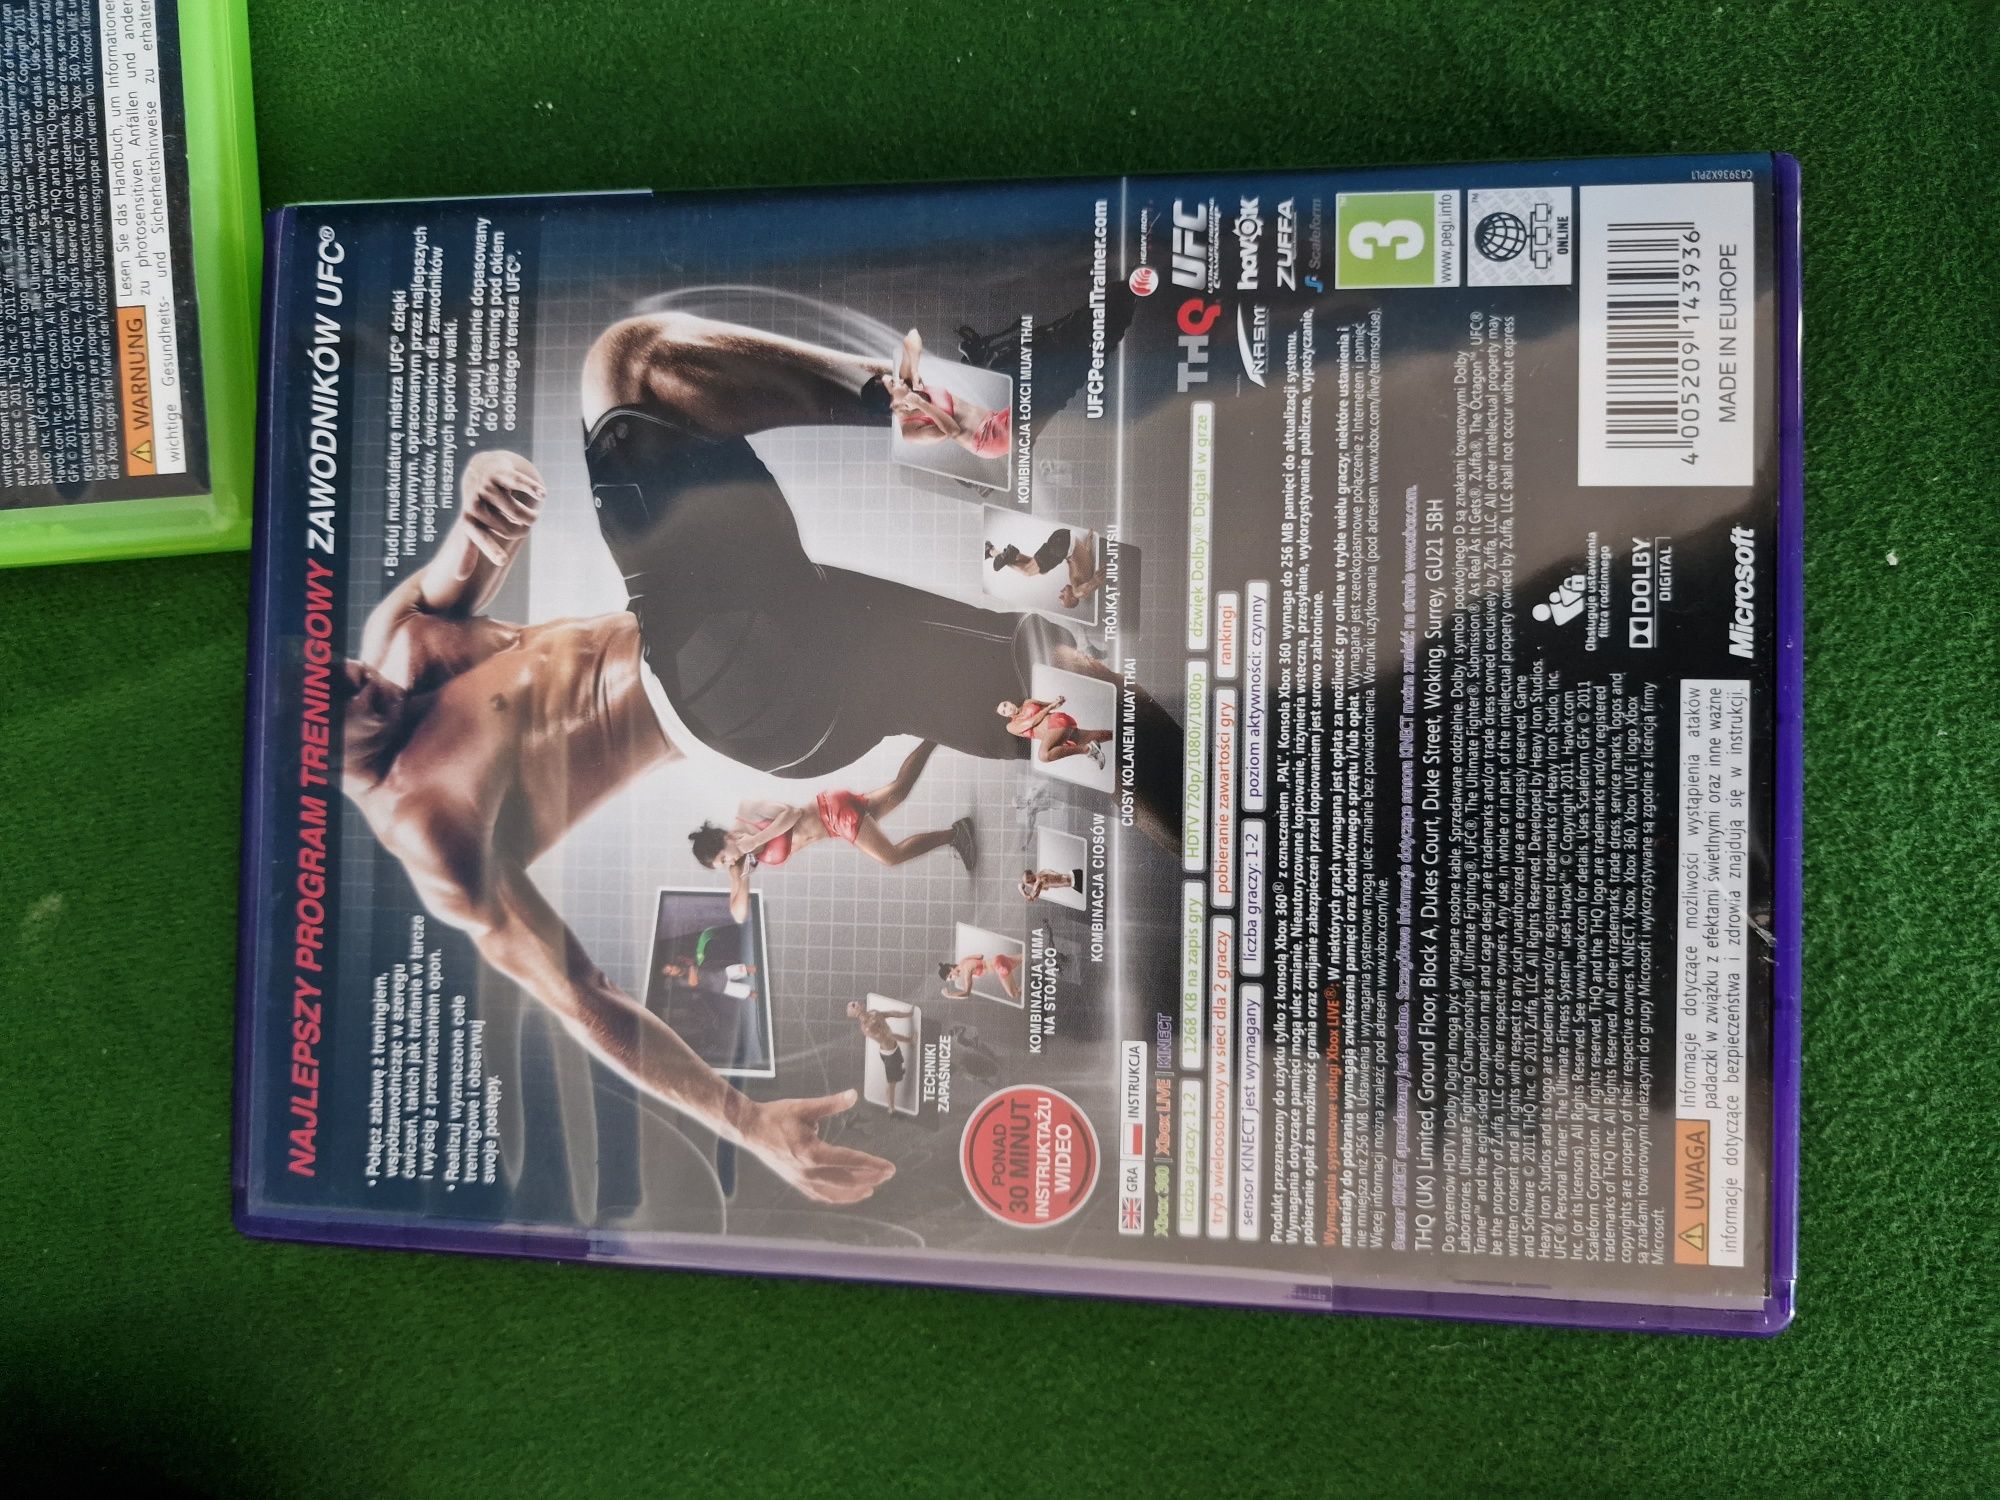 UFC trainer Xbox 360 the ultimate fitness system x360 kinect pl